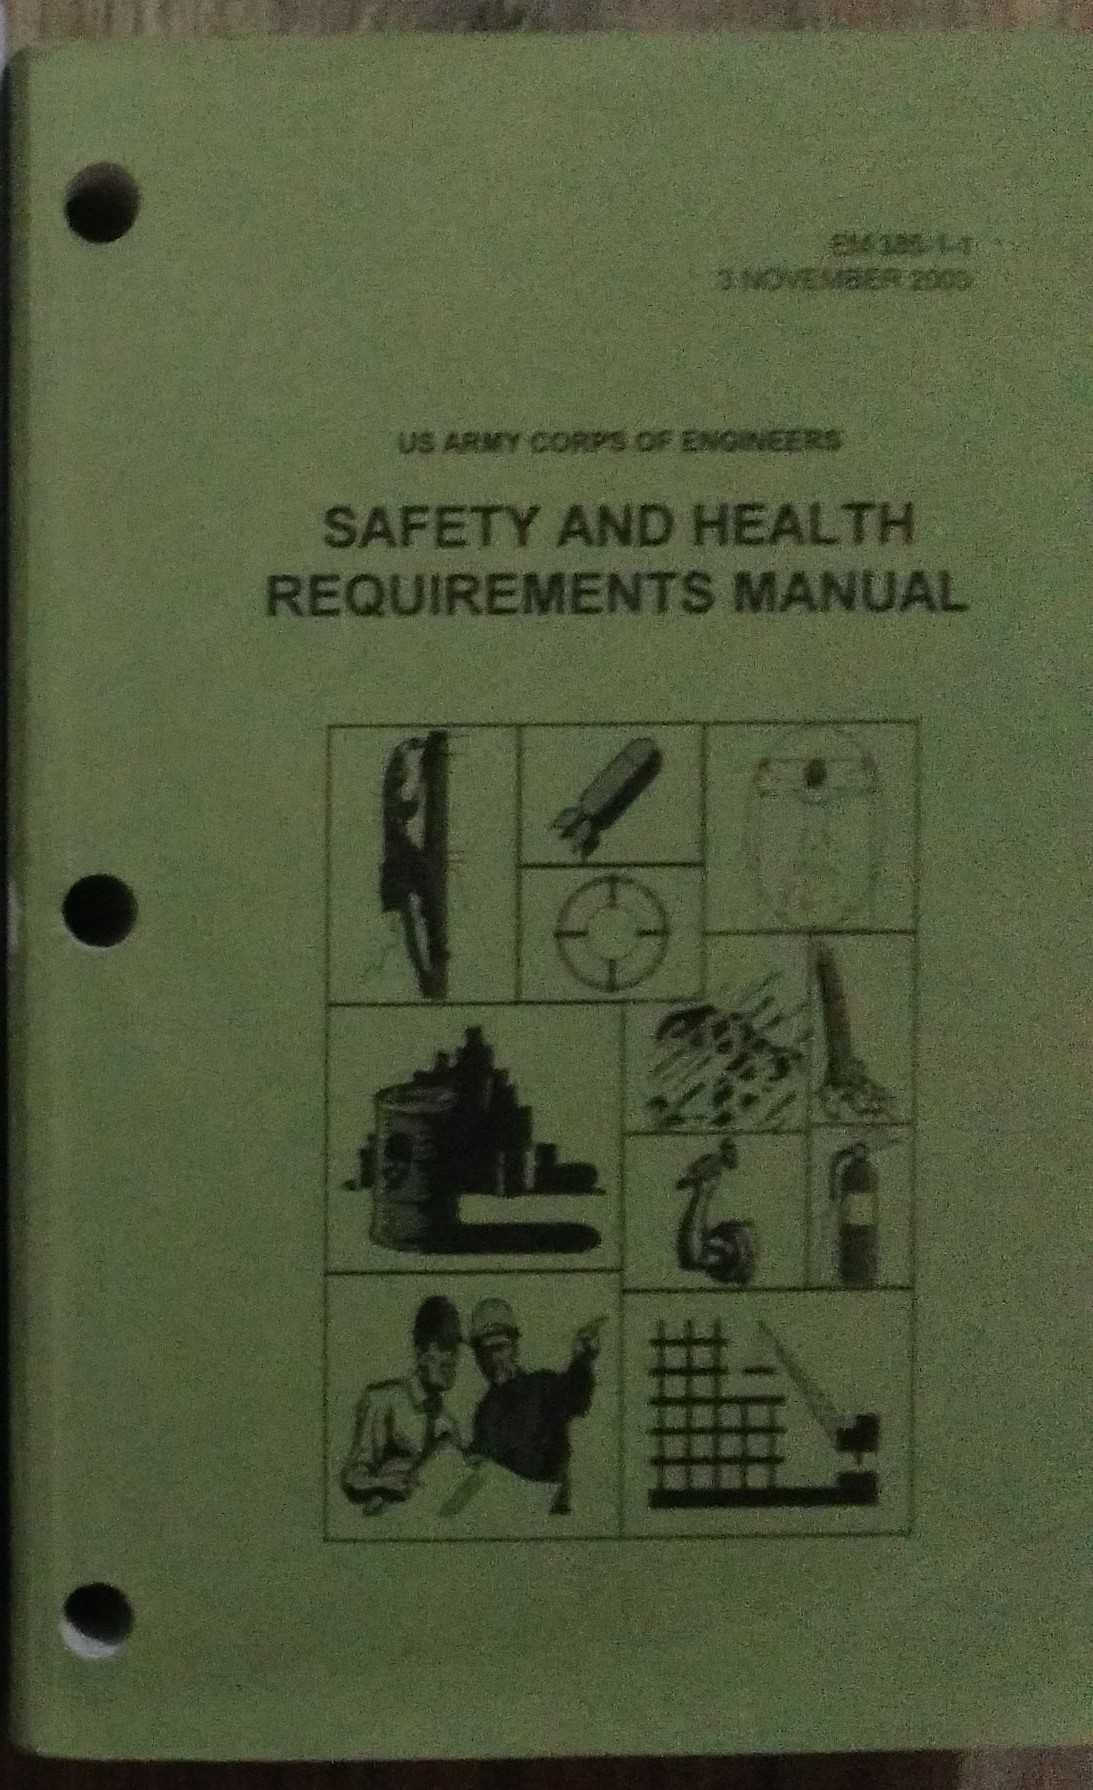 US Army corps of Engineers Safety and Health Requirements Manual 2003